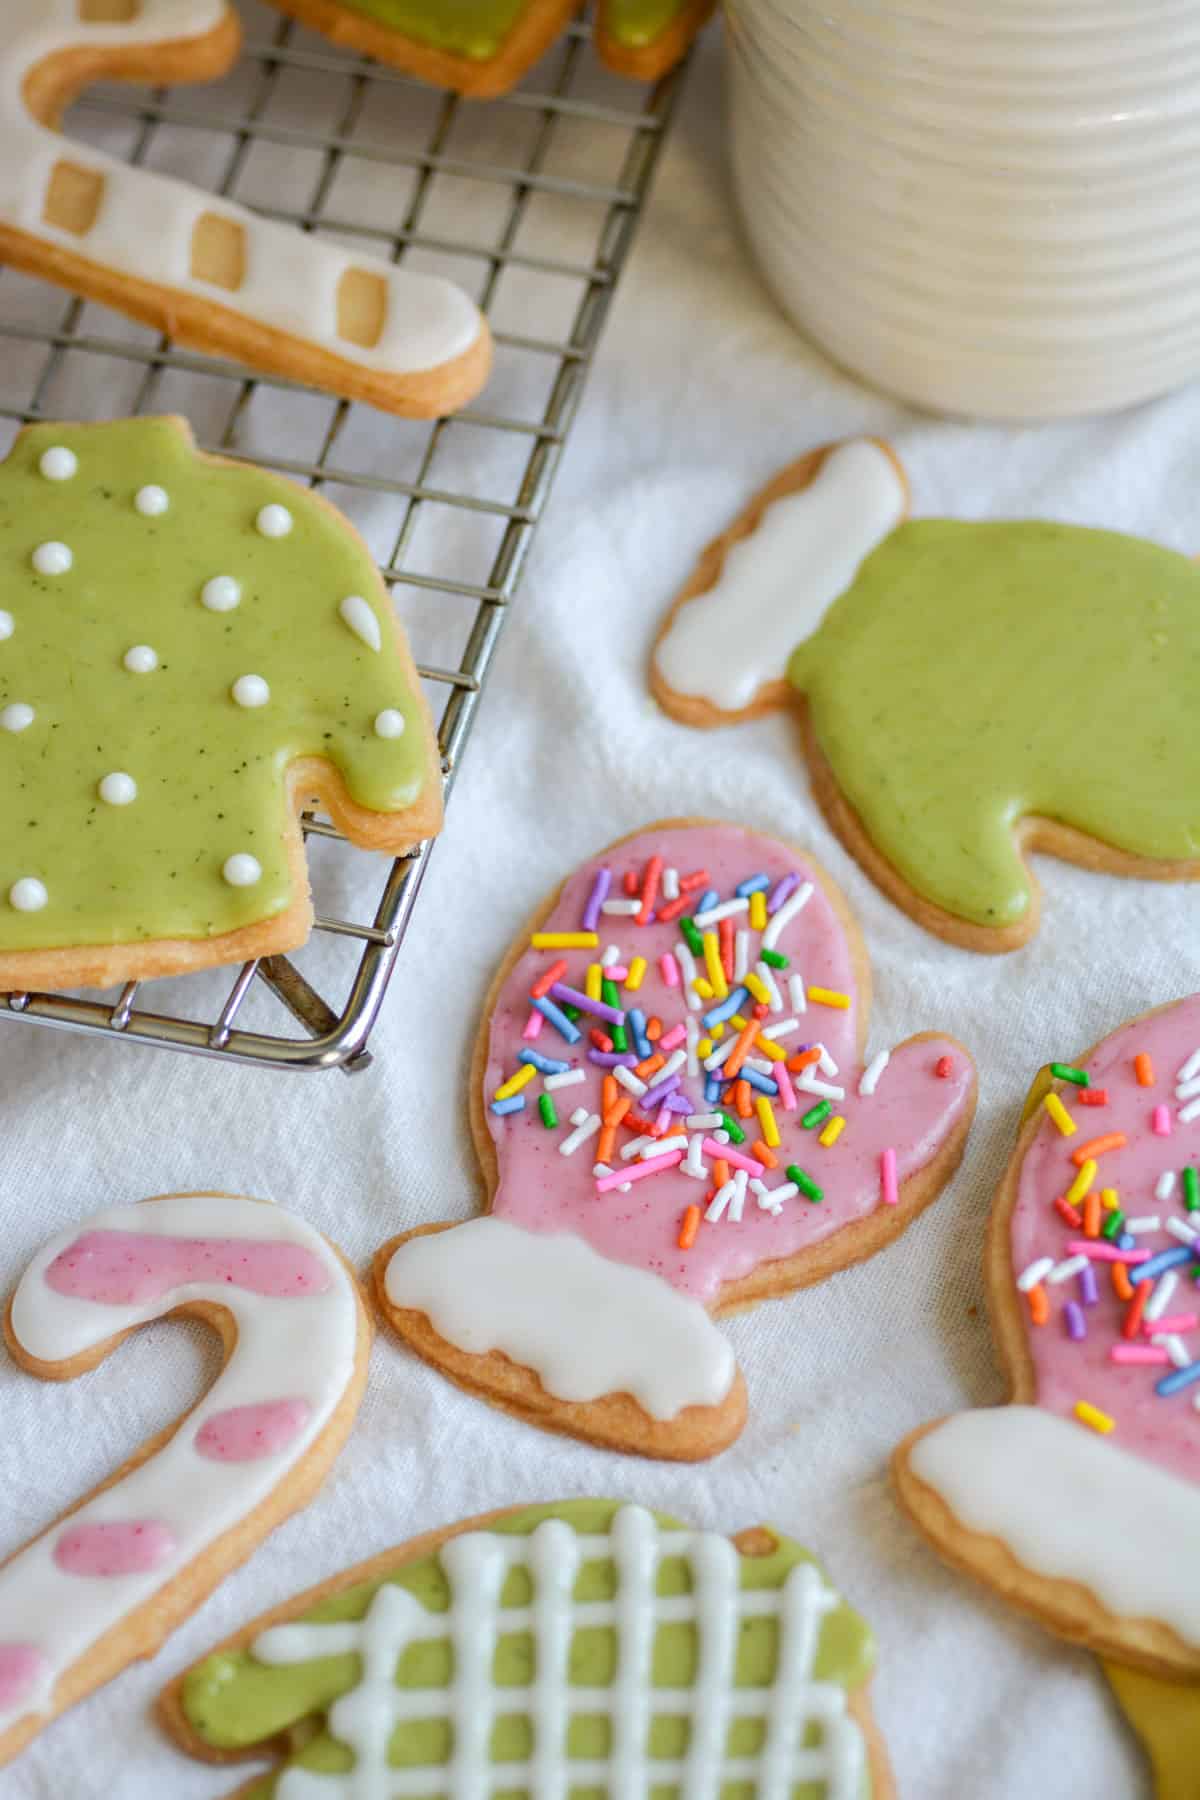 Vegan Cut-Out Sugar Cookies decorated with white, pink and green icing on a white cloth.